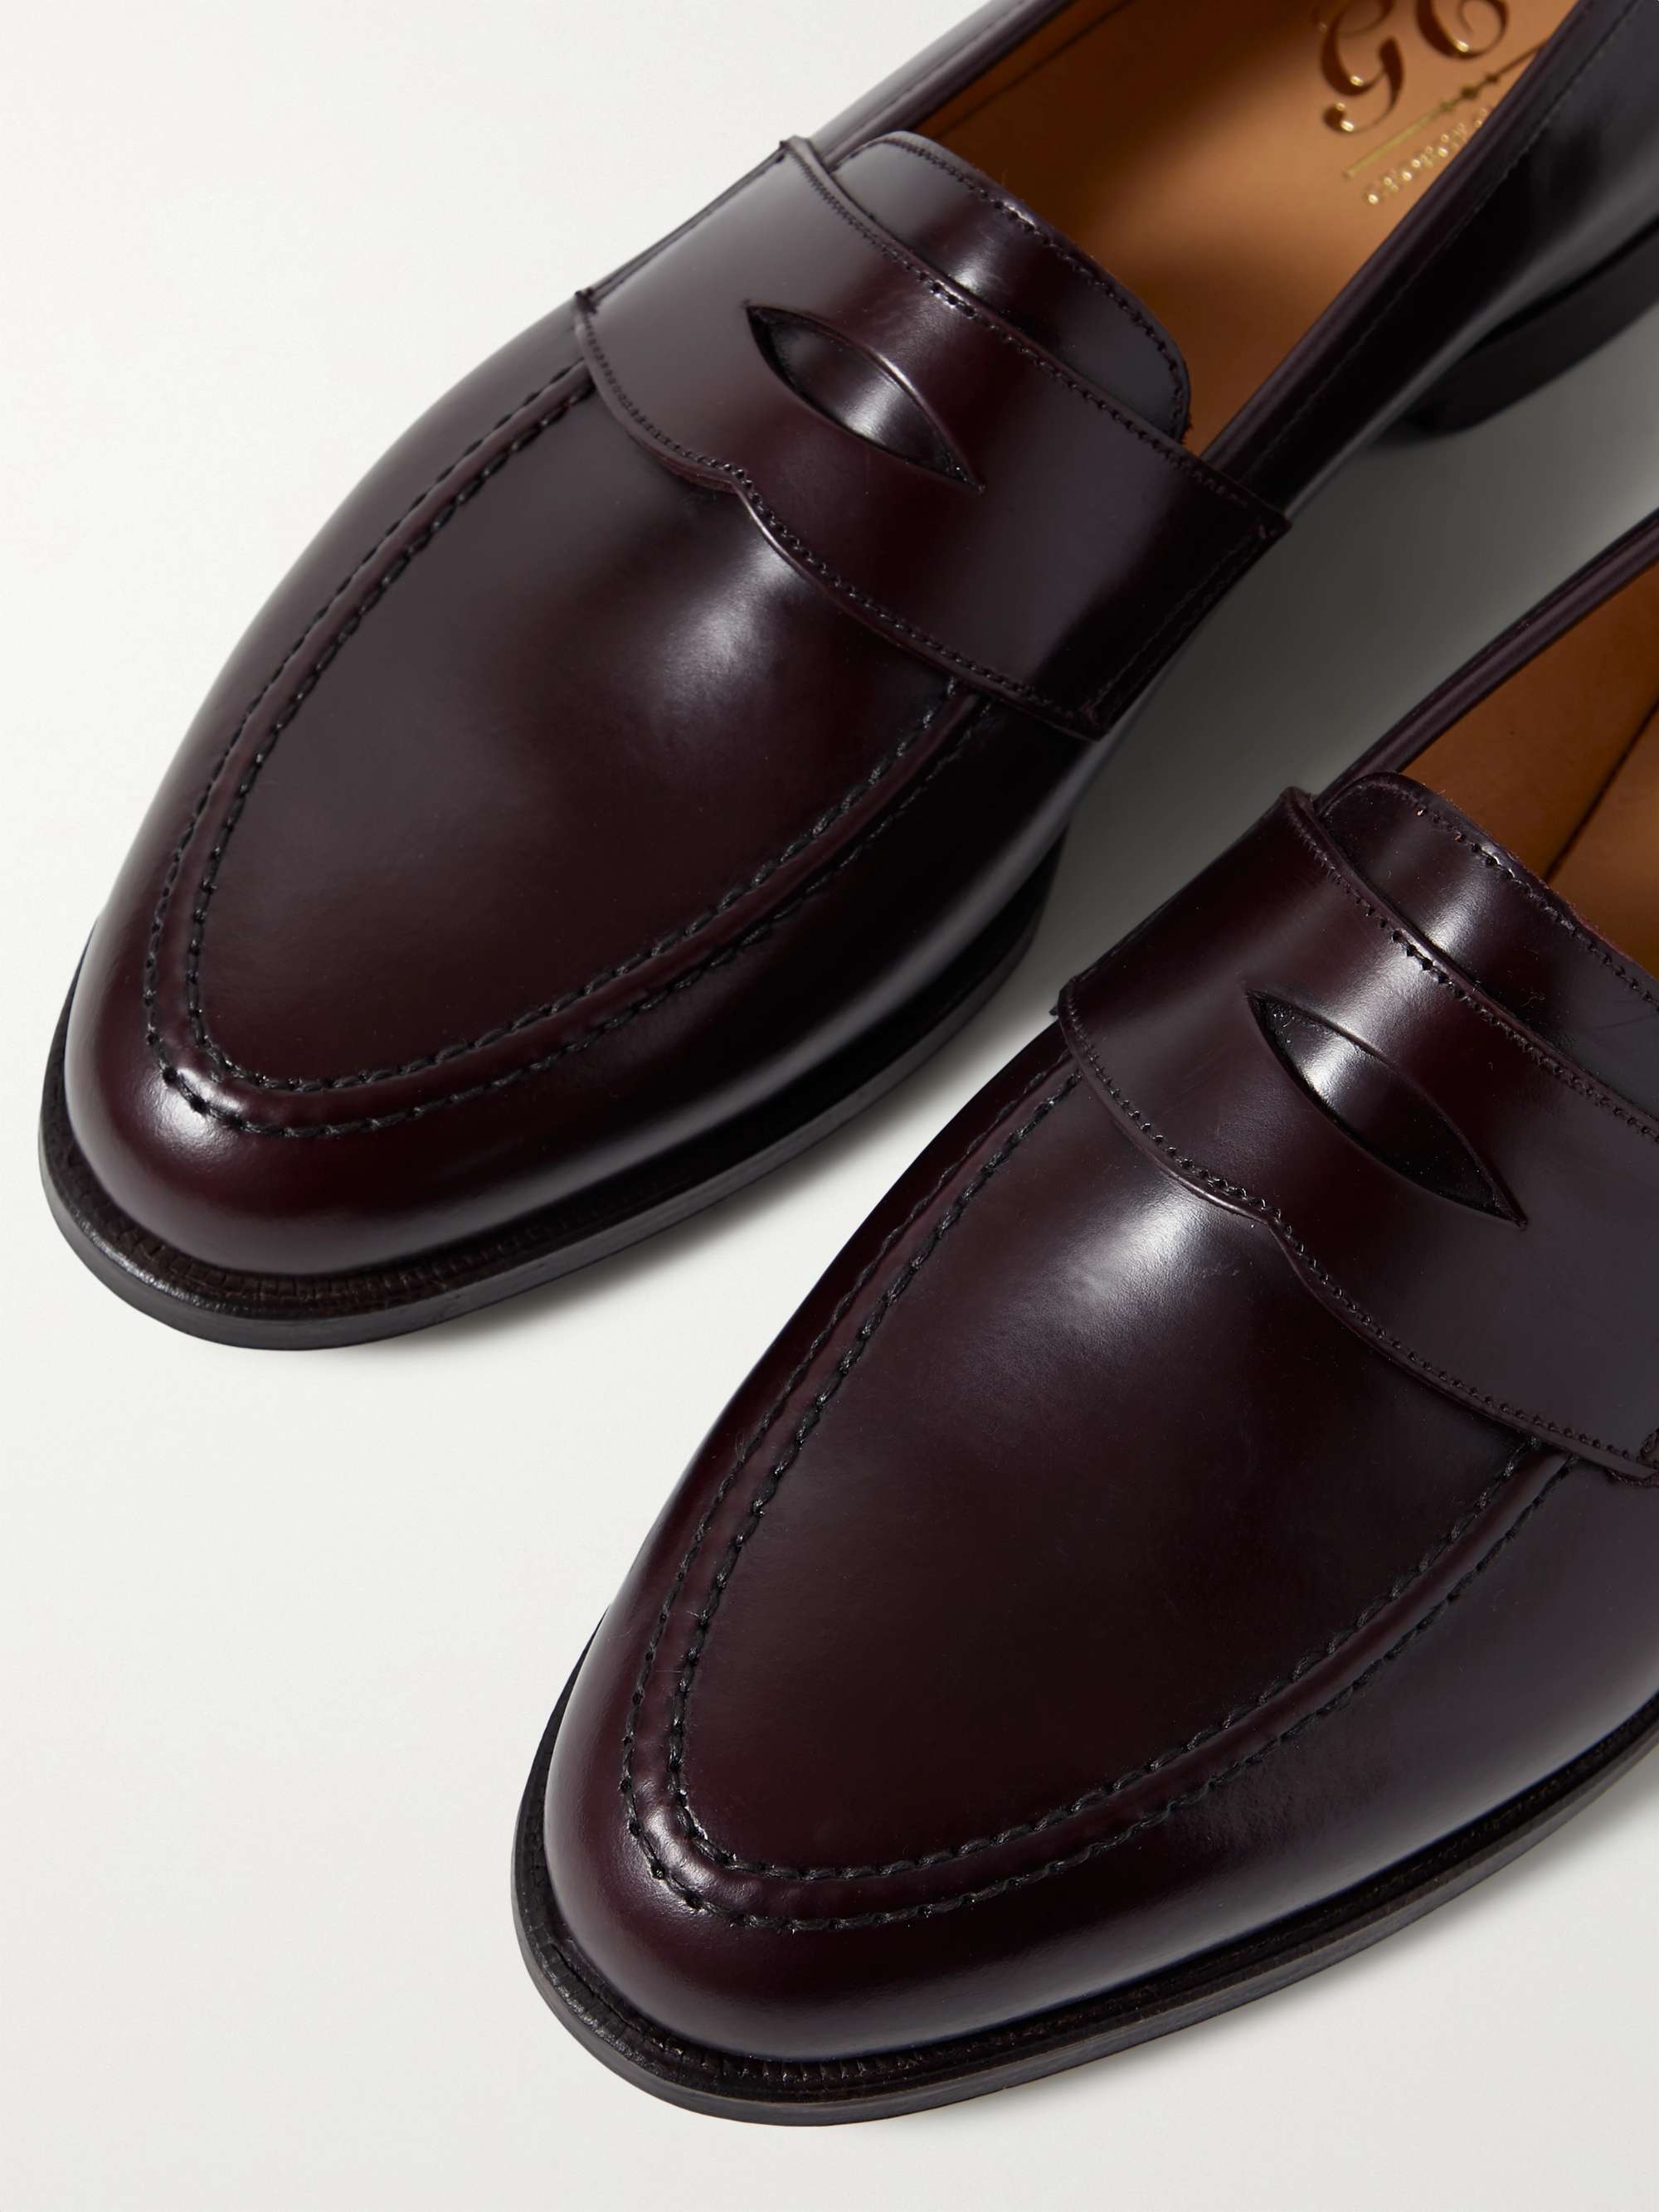 GEORGE CLEVERLEY Bradley Leather Penny Loafers